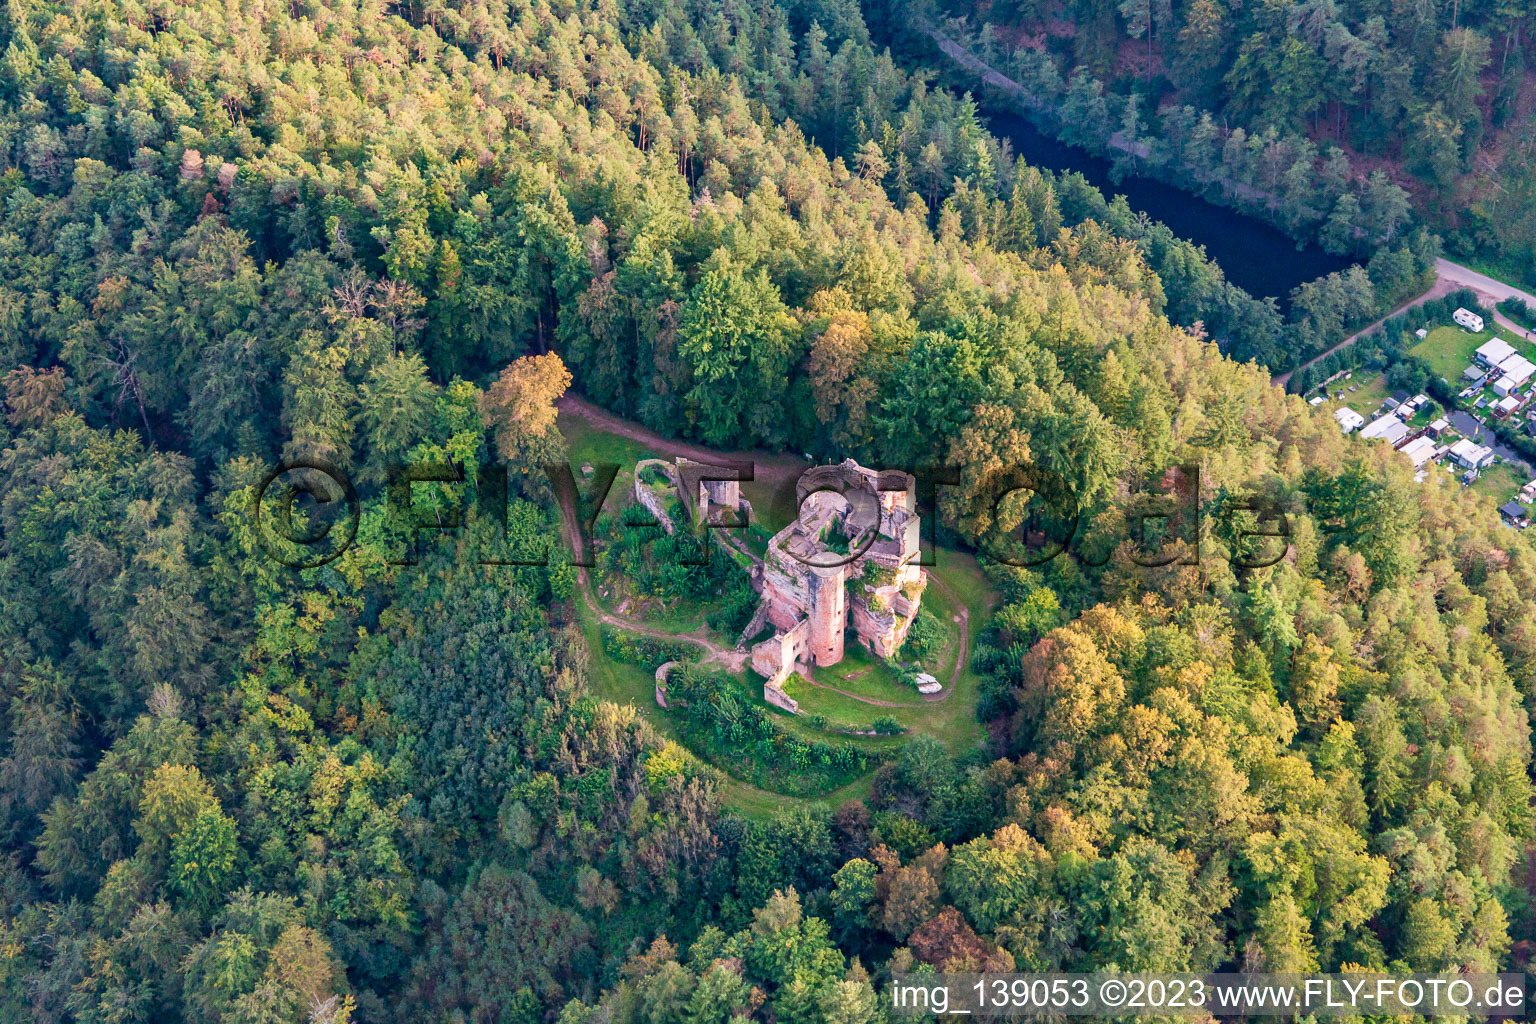 Neudahn castle ruins above the Neudahner Weiher campsite in Dahn in the state Rhineland-Palatinate, Germany from above